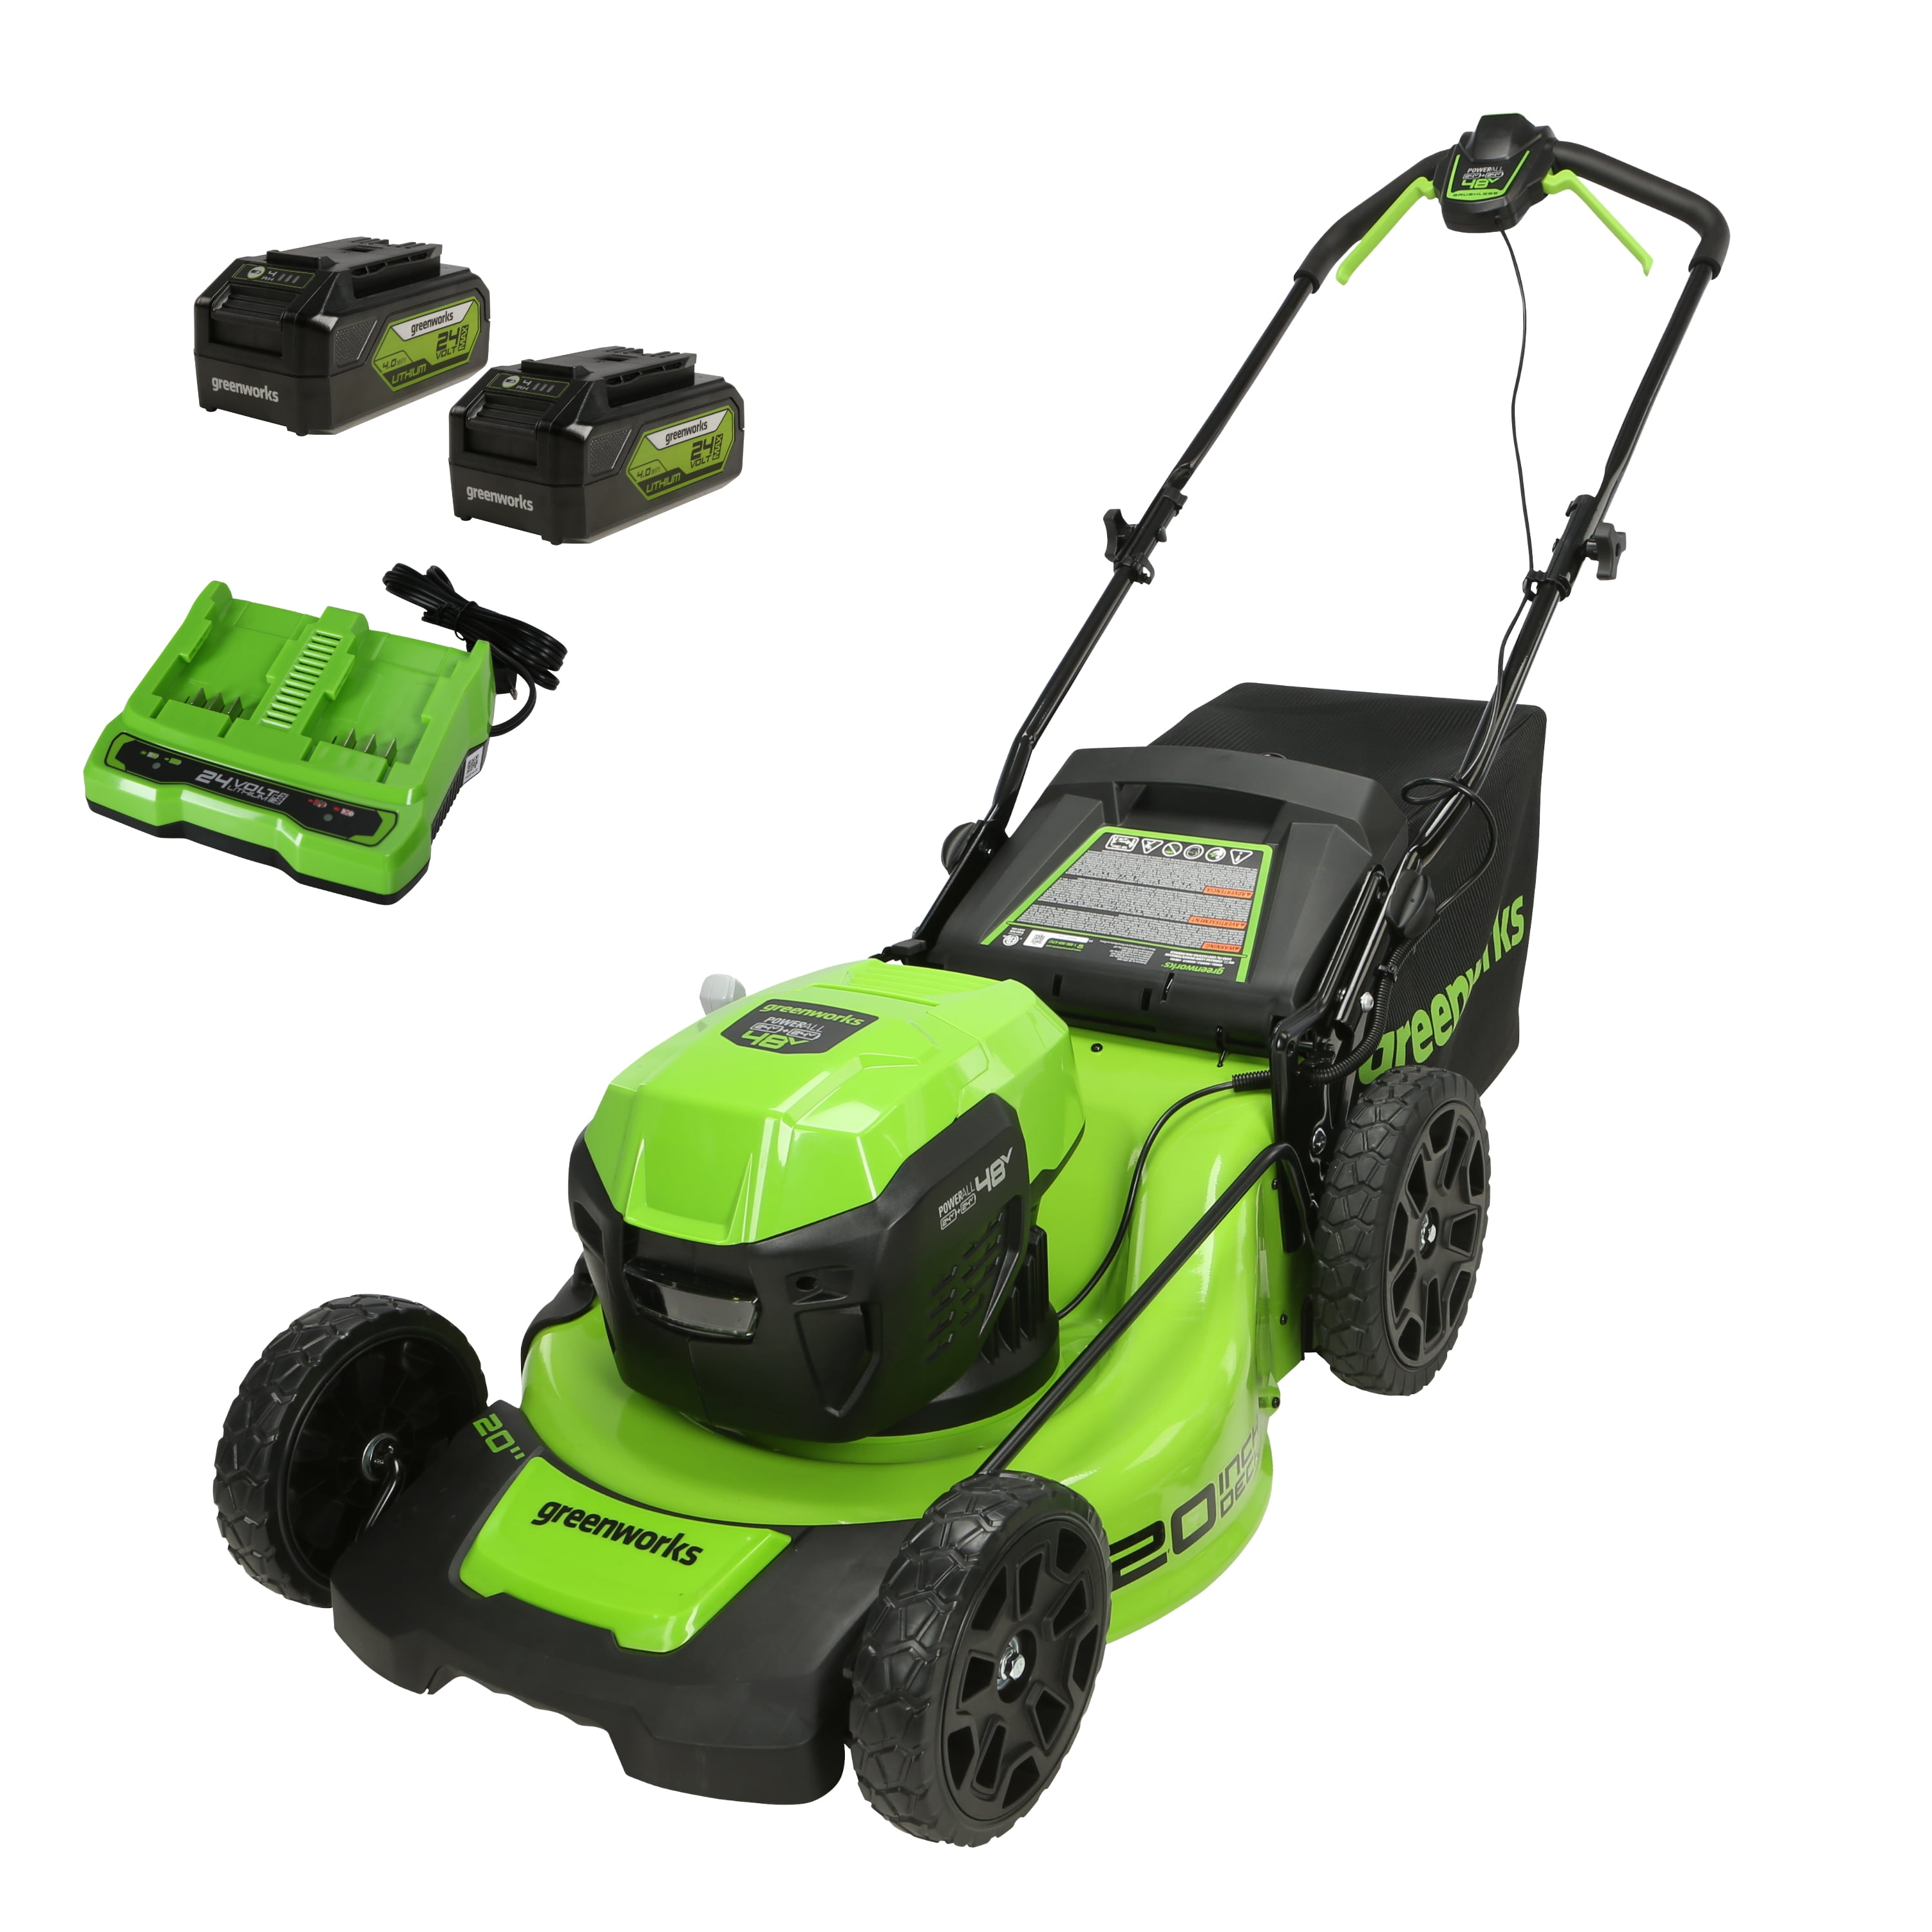 Greenworks 48V (2x24V) 20 in. Brushless Push Lawn Mower with (2) 4.0 Ah Batteries & Charger